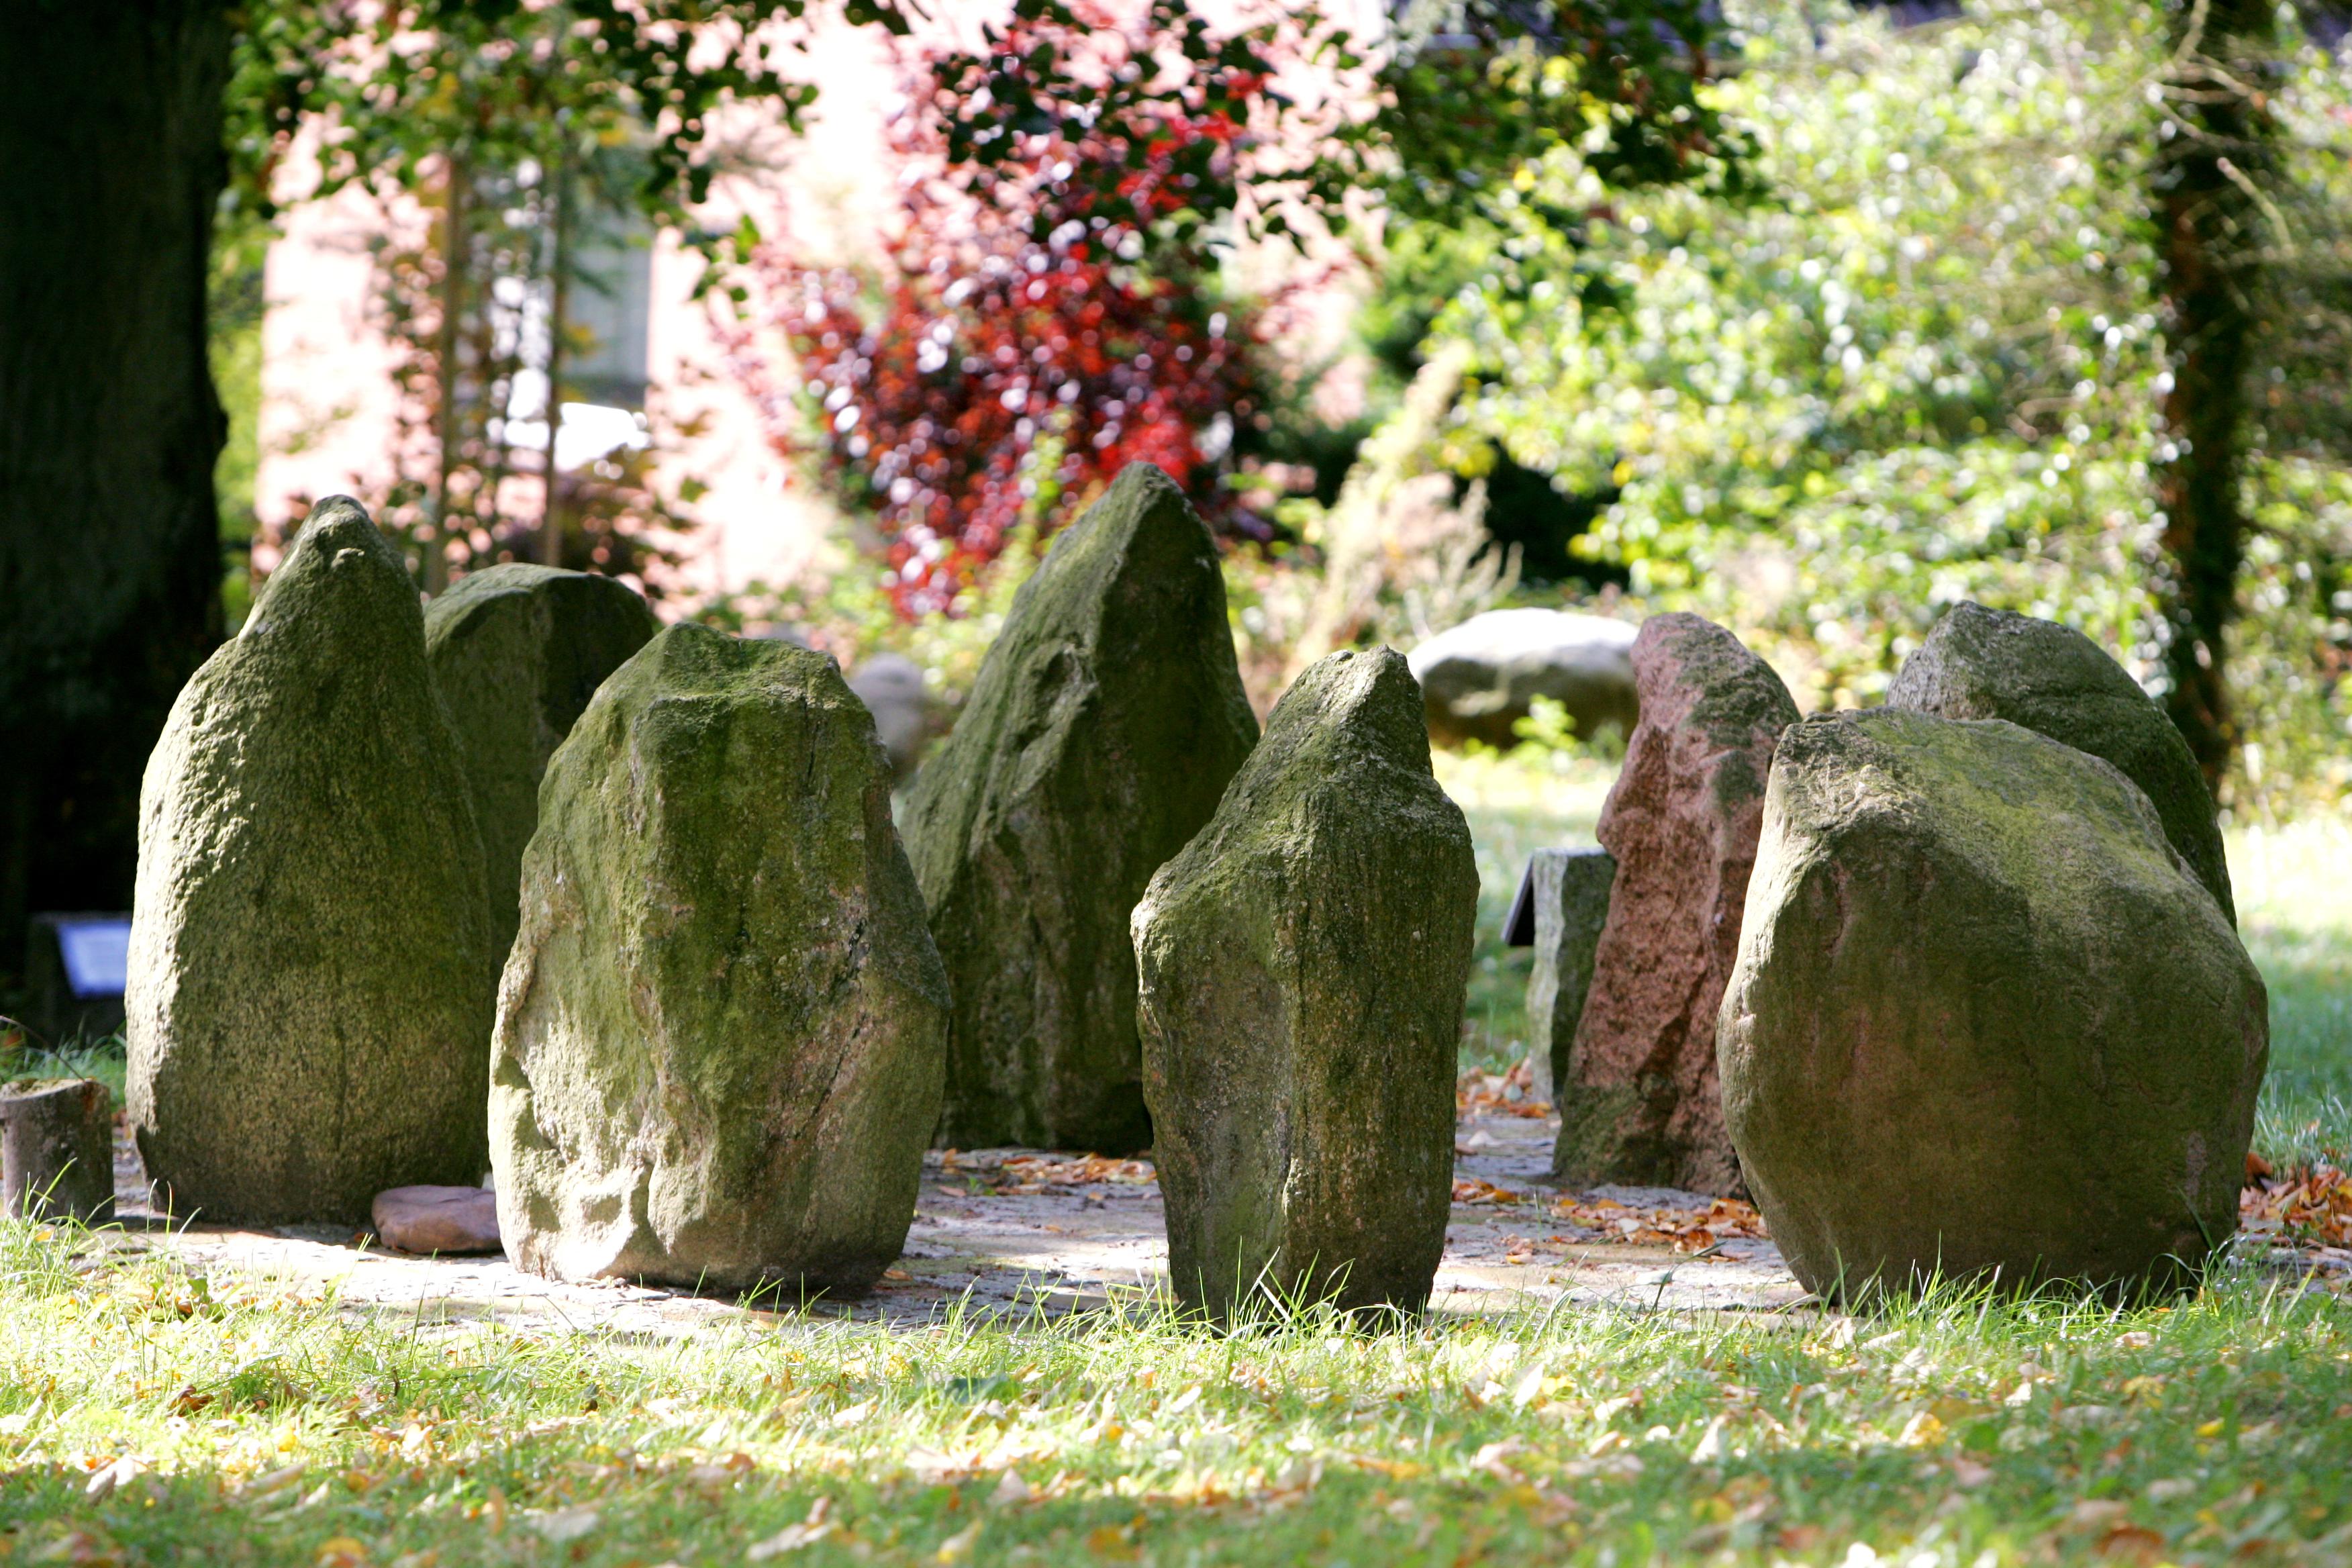 Egestorf: The natural wonder of the Philosophical Stone Garden